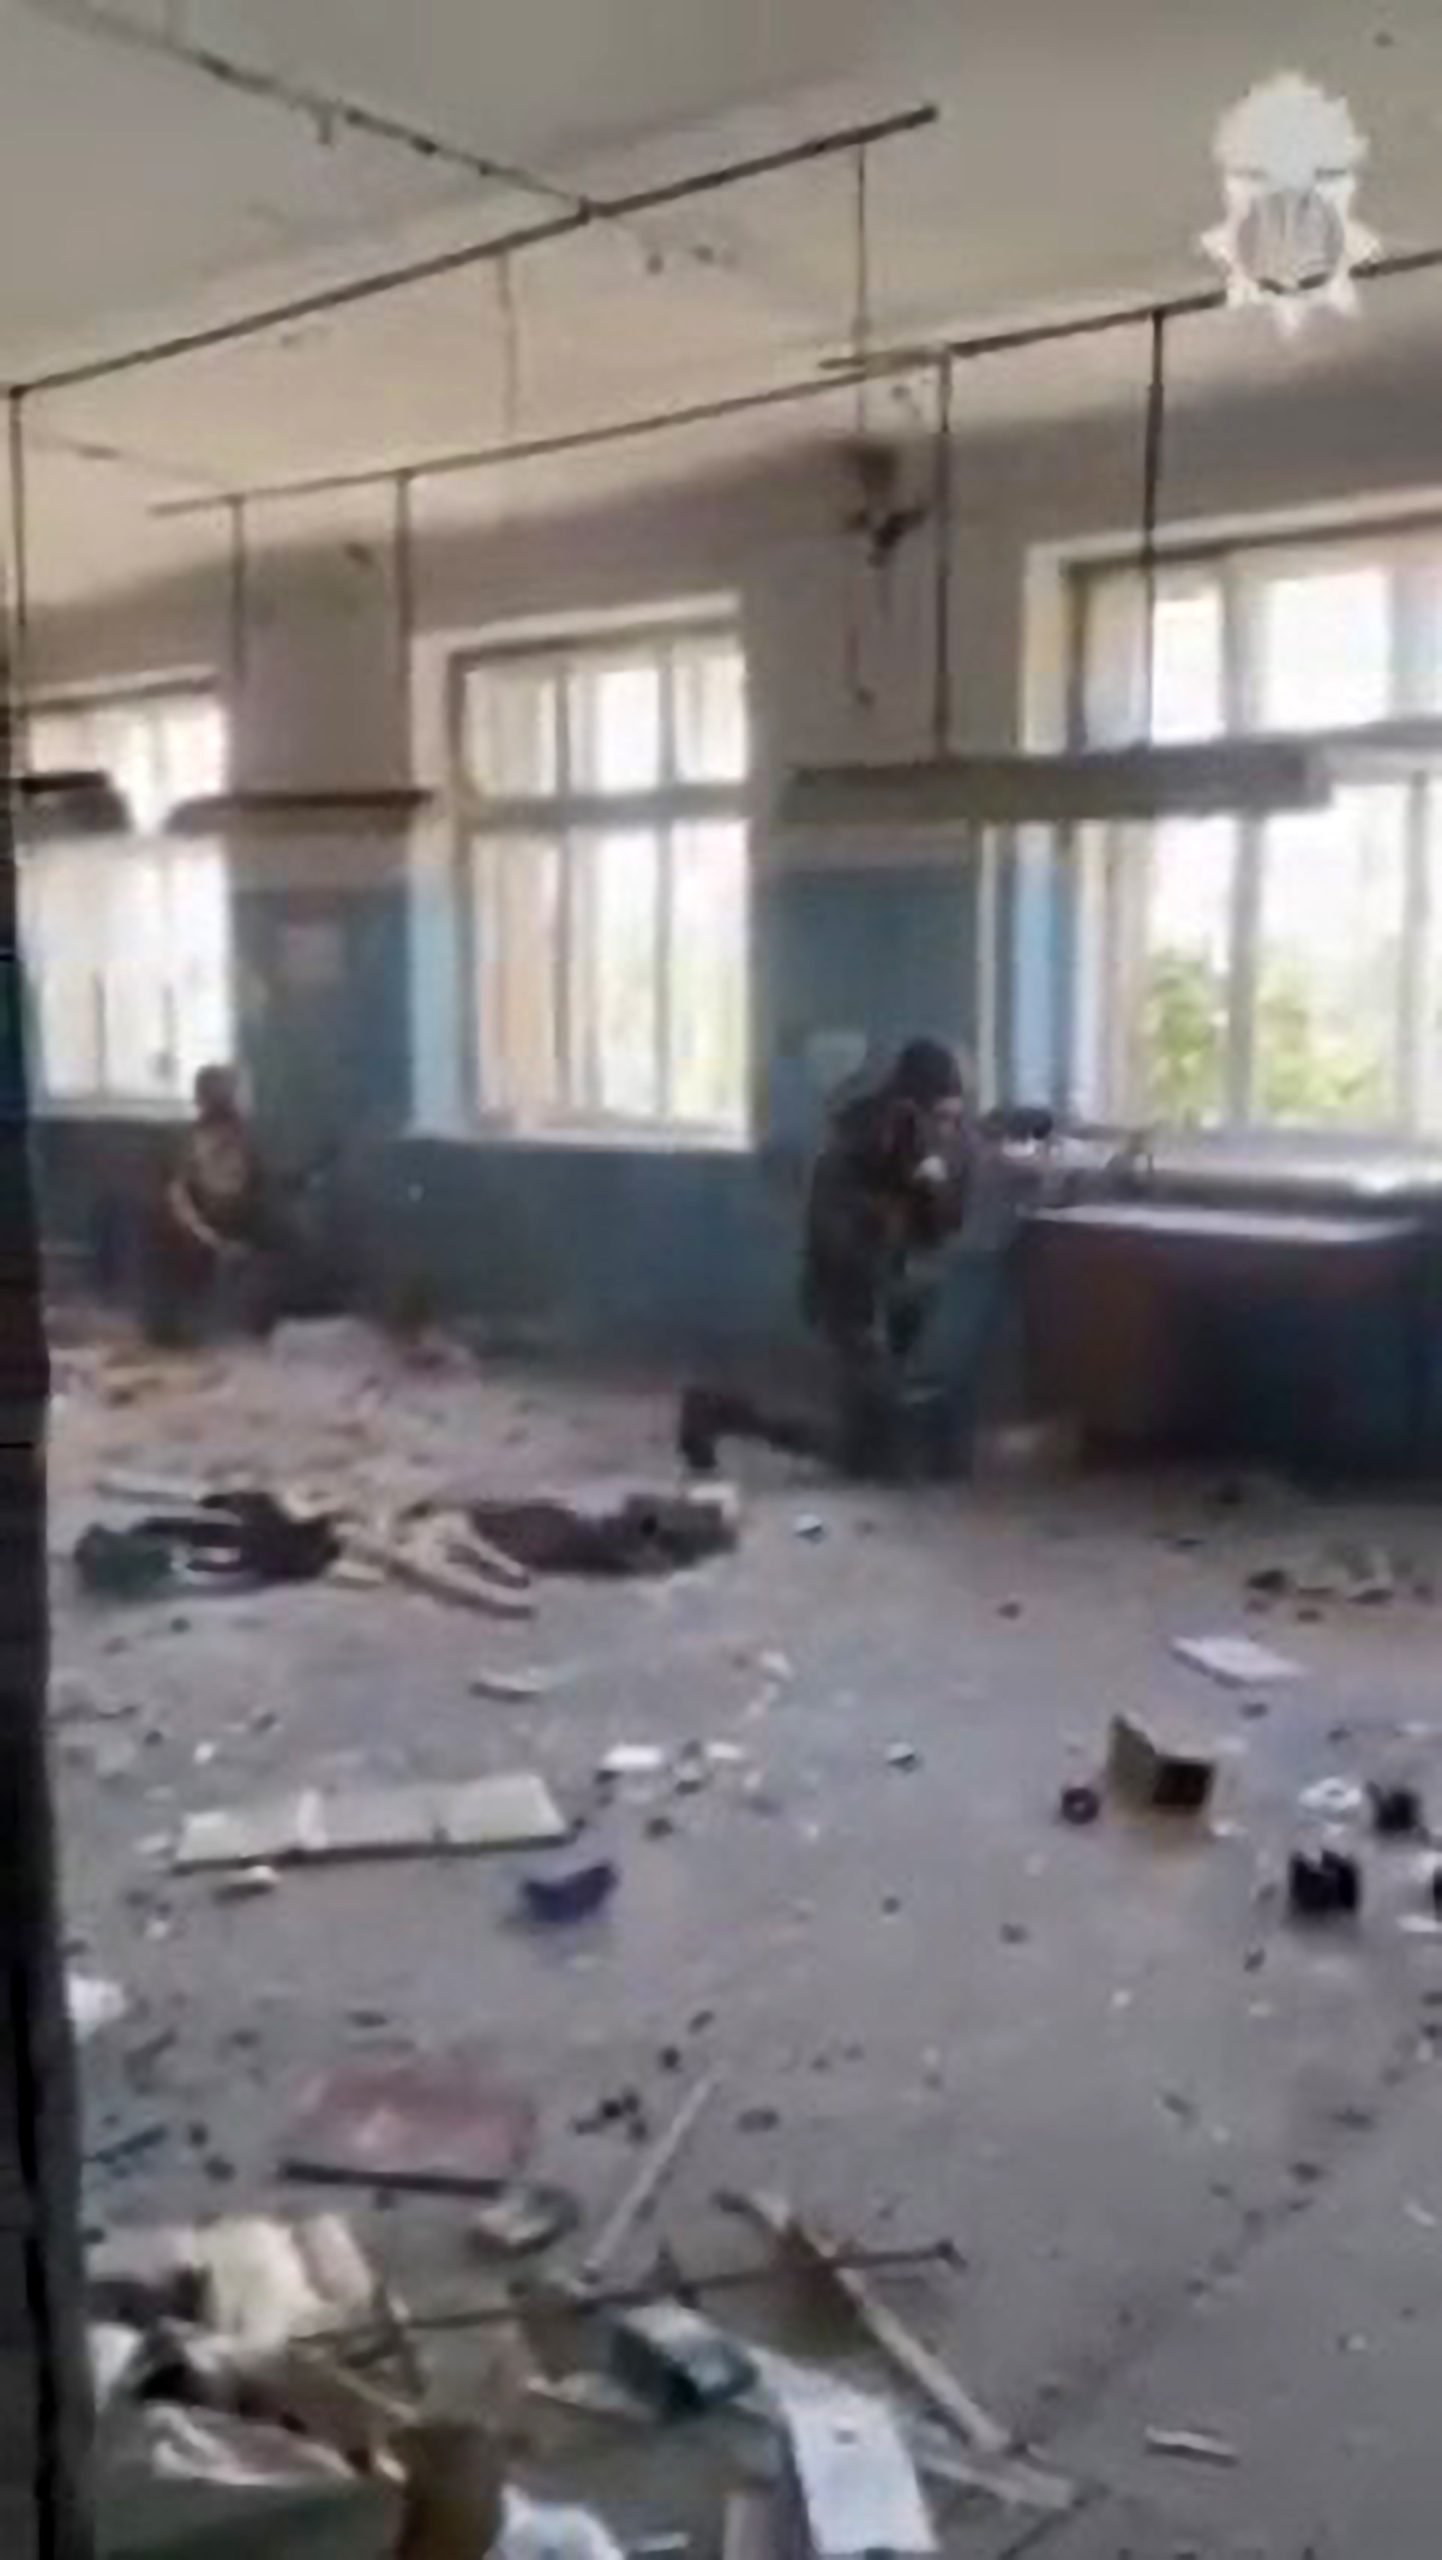 Read more about the article WAR IN UKRAINE: Moment Ukrainian Soldier Fires Rocket From Building Filling Room With Smoke